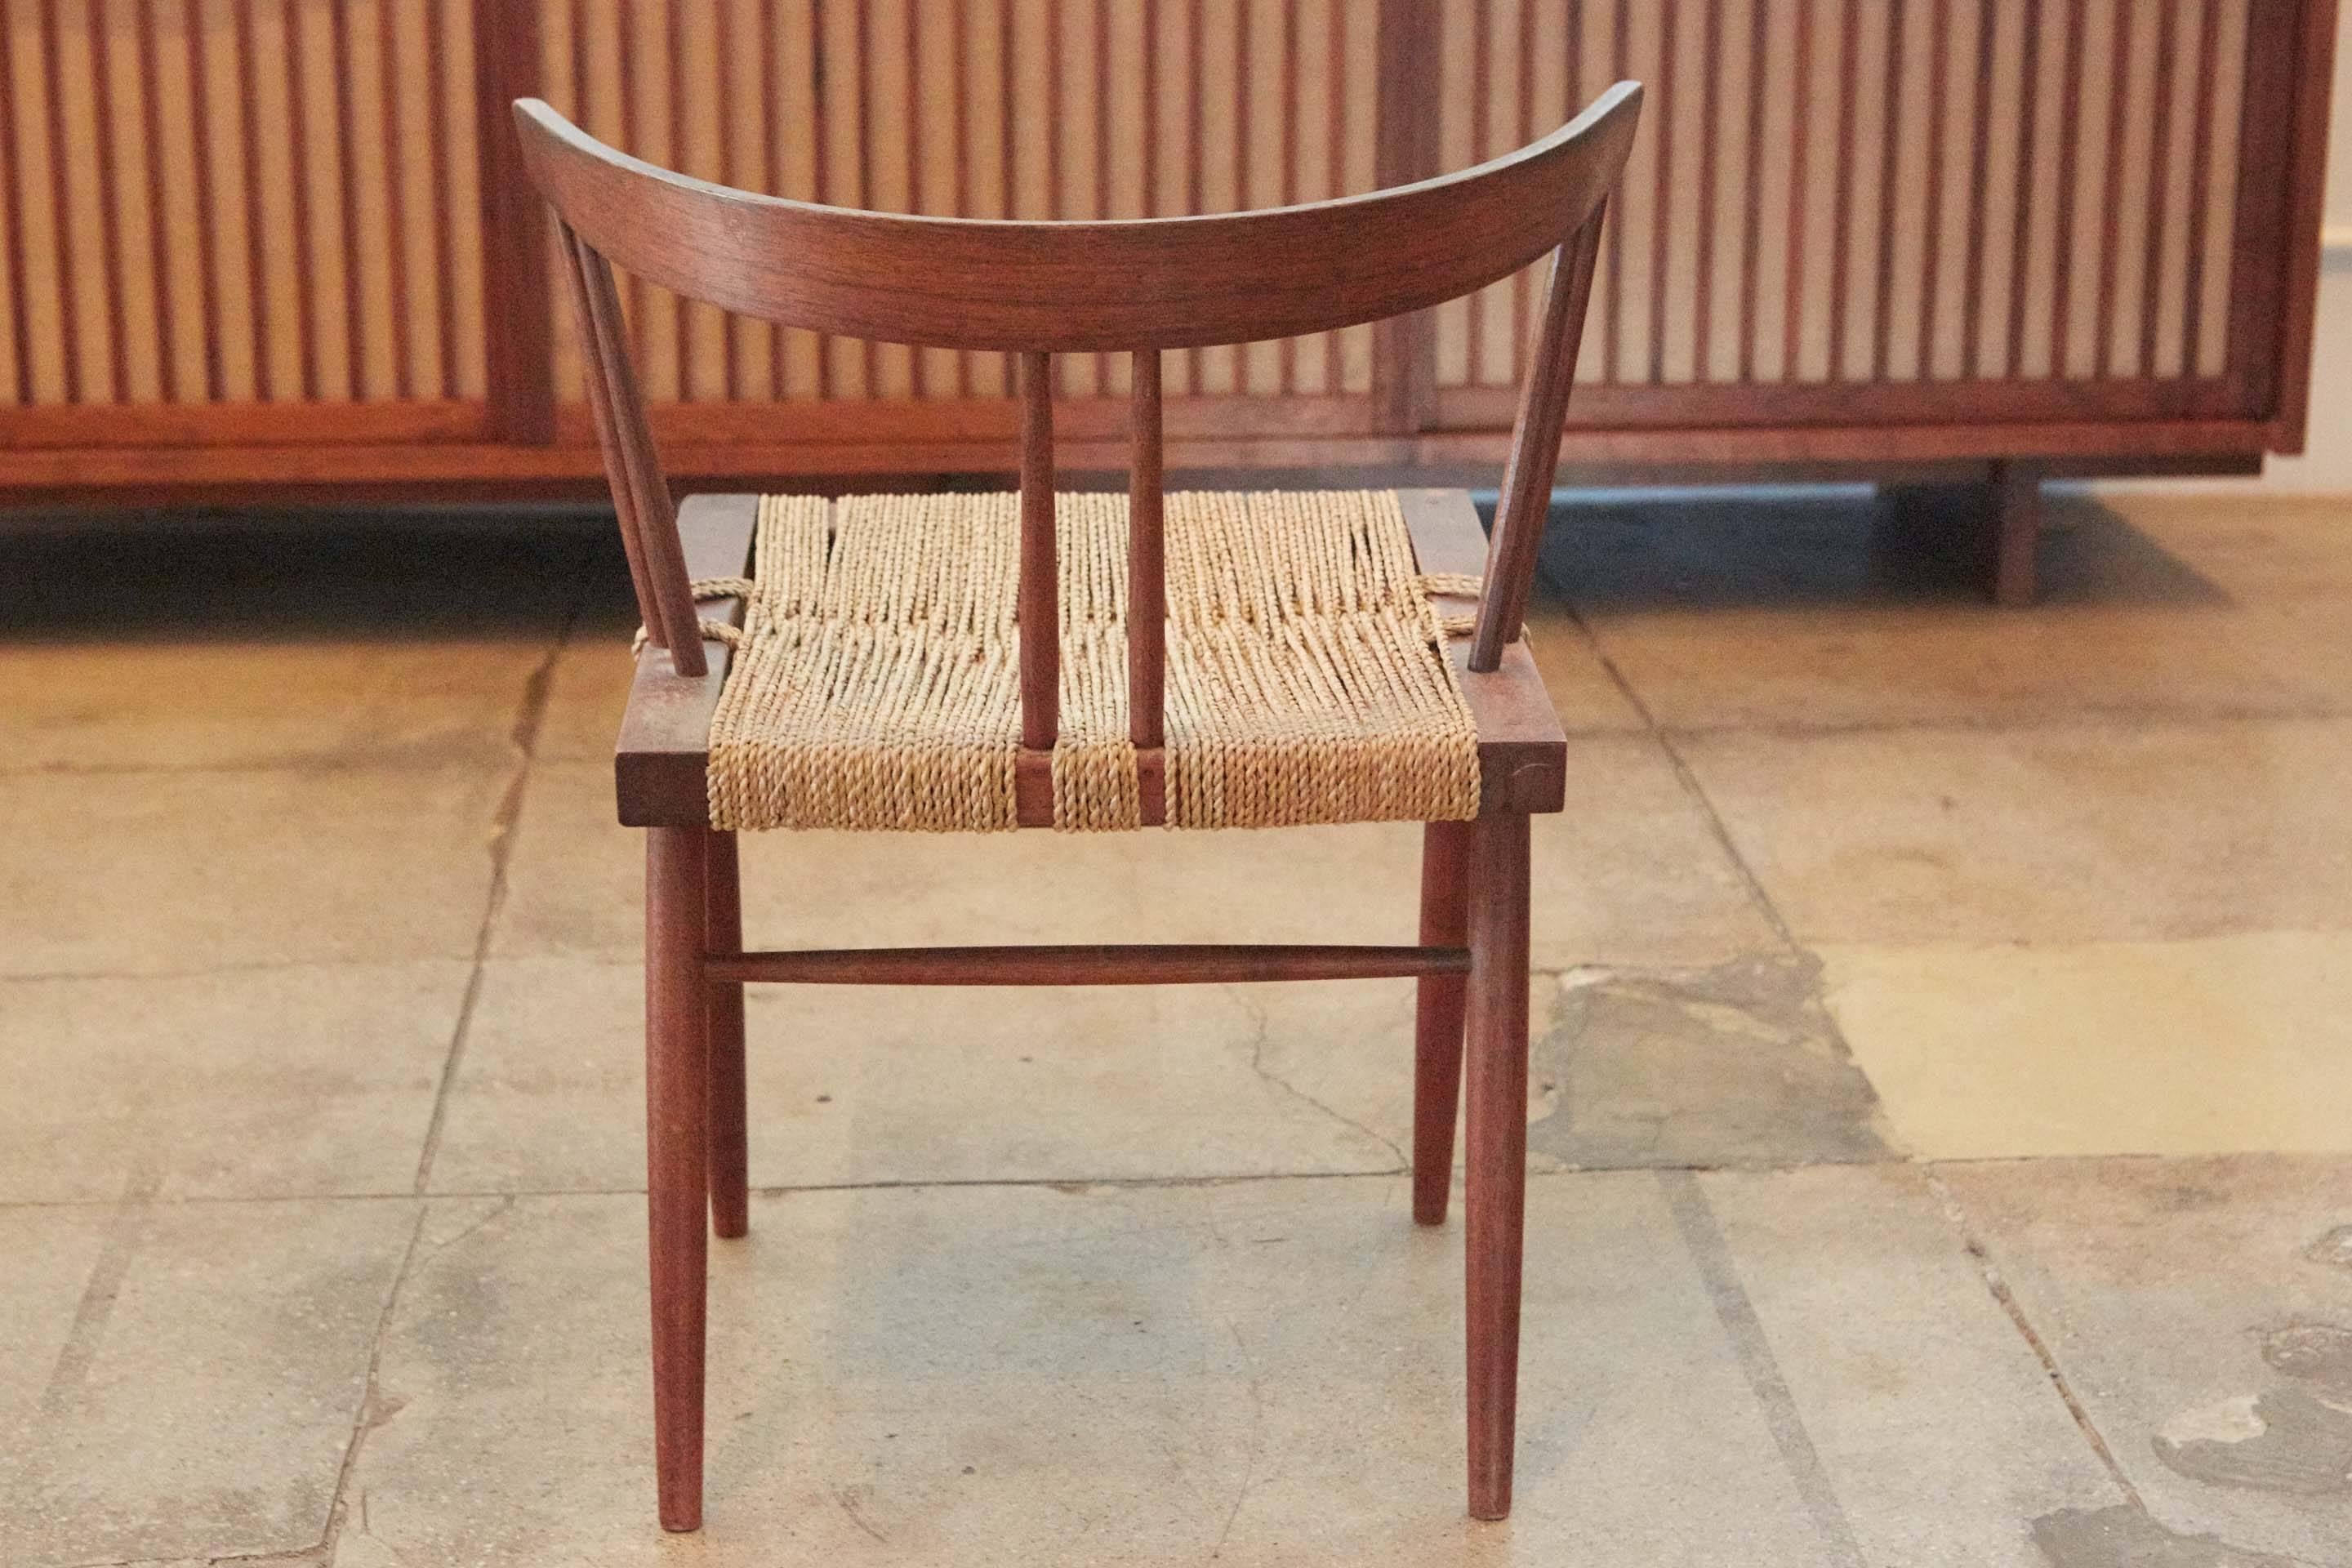 Set of 12 Grass Seat Chairs by George Nakashima, New Hope, Pennsylvania 2